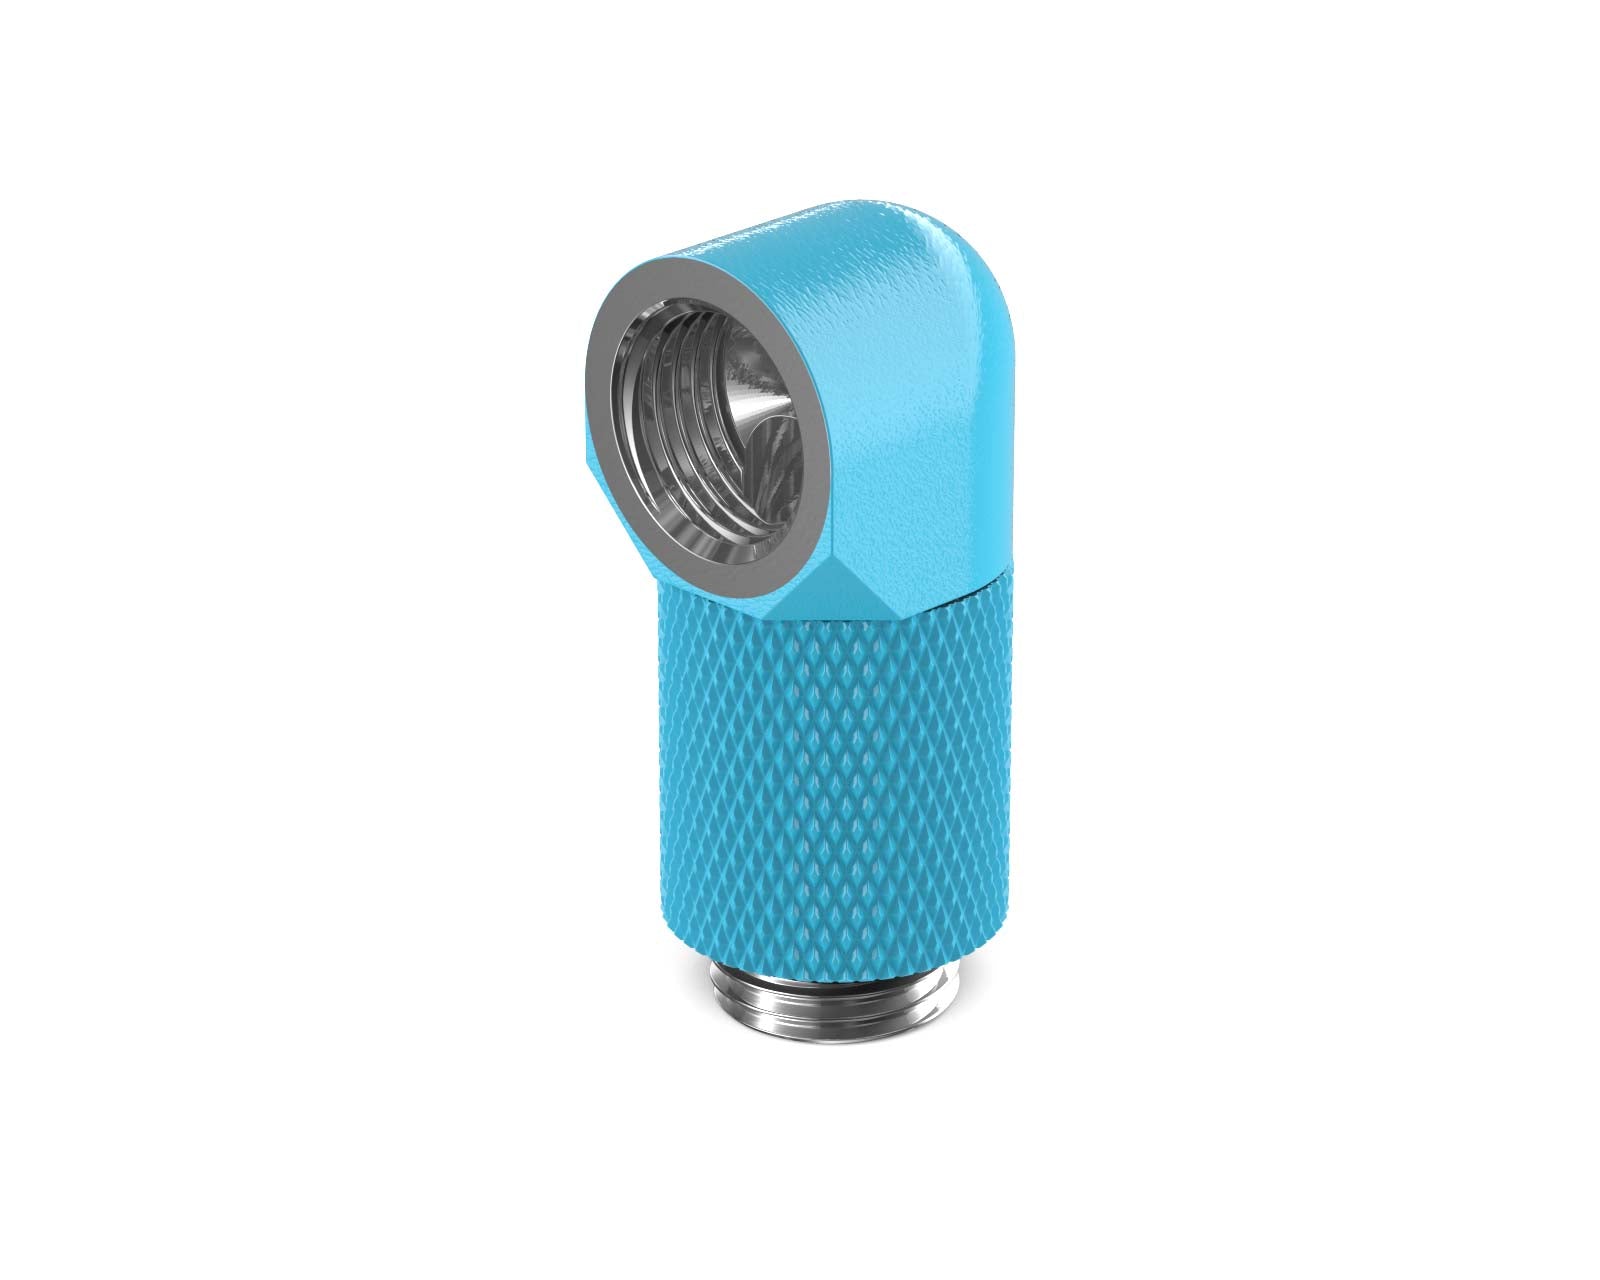 PrimoChill Male to Female G 1/4in. 90 Degree SX Rotary 20mm Extension Elbow Fitting - PrimoChill - KEEPING IT COOL Sky Blue